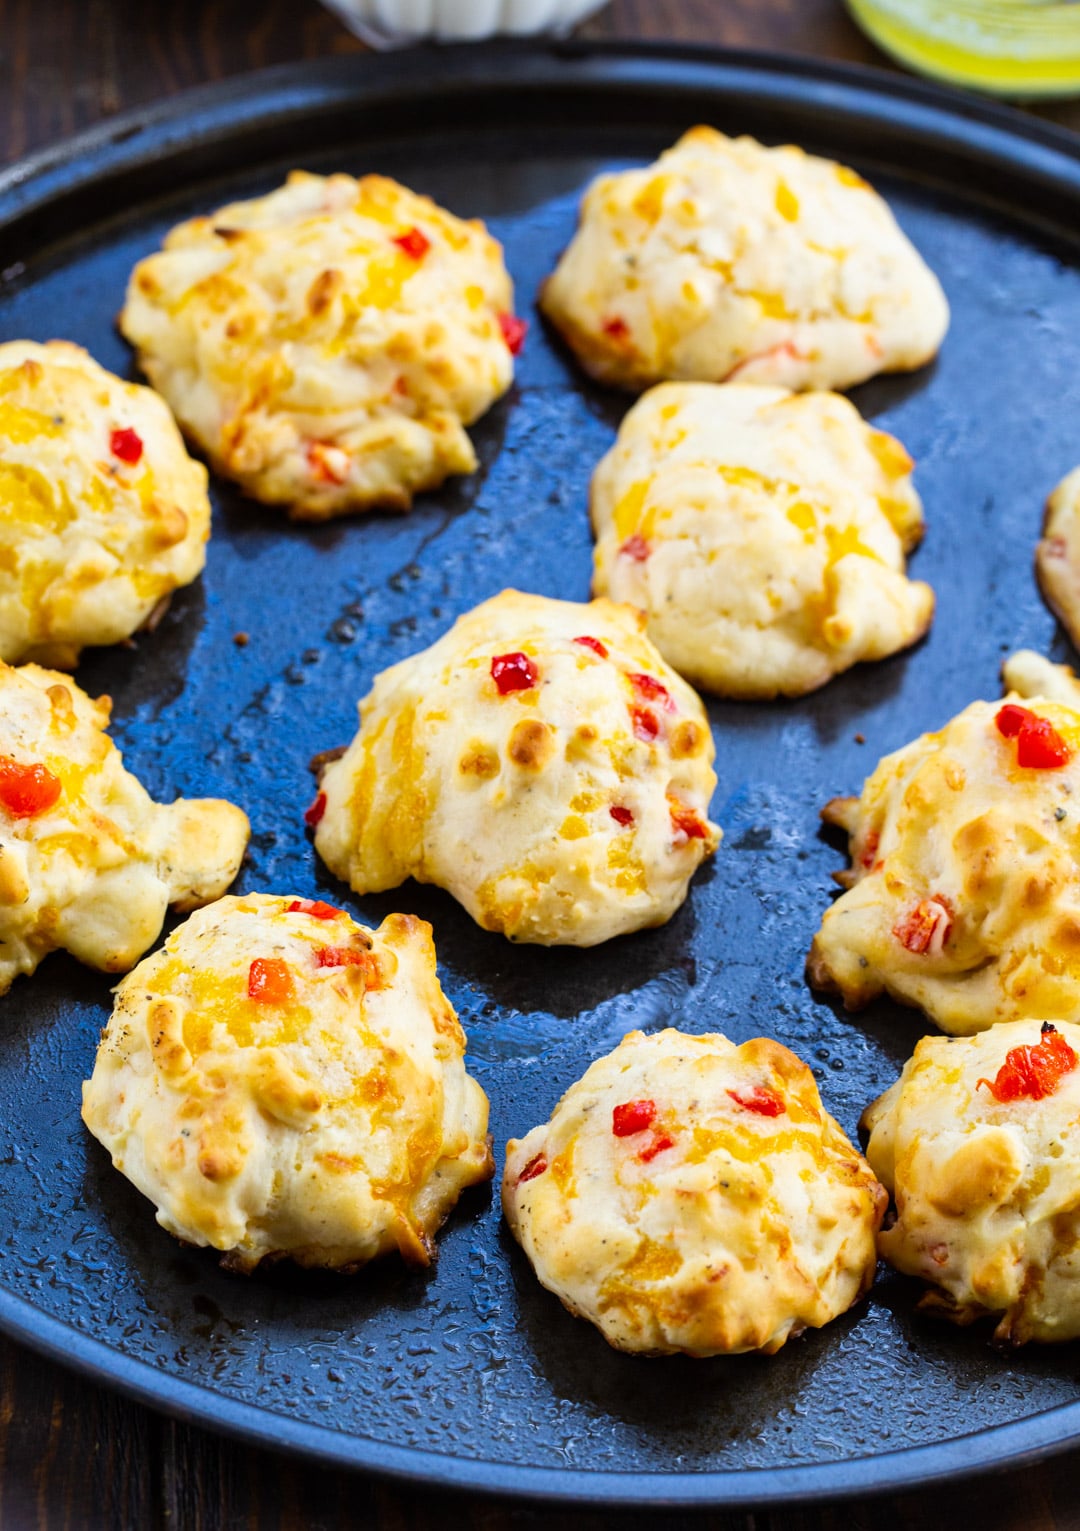 Biscuits on a baking sheet.